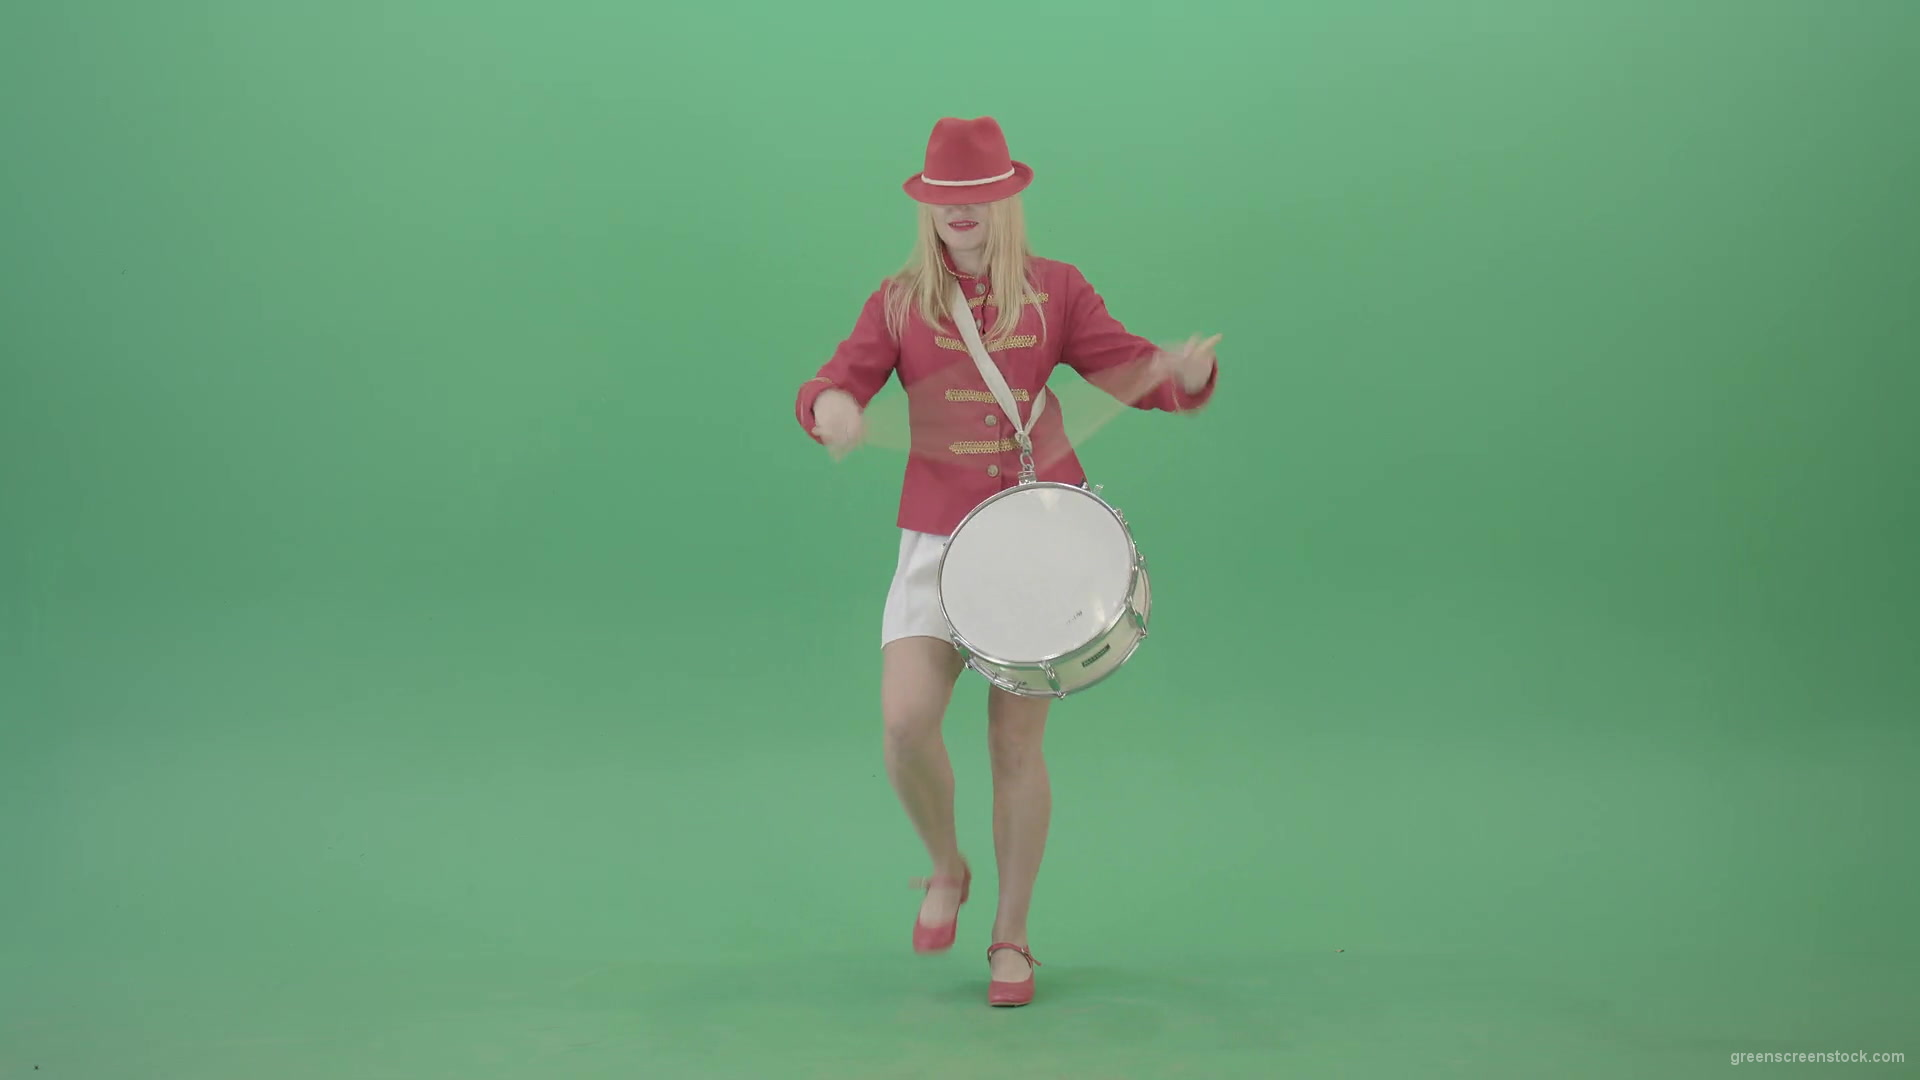 Blonde-Girl-playing-snare-drum-fast-and-marching-on-green-screen-4K-Video-Footage-1920_004 Green Screen Stock